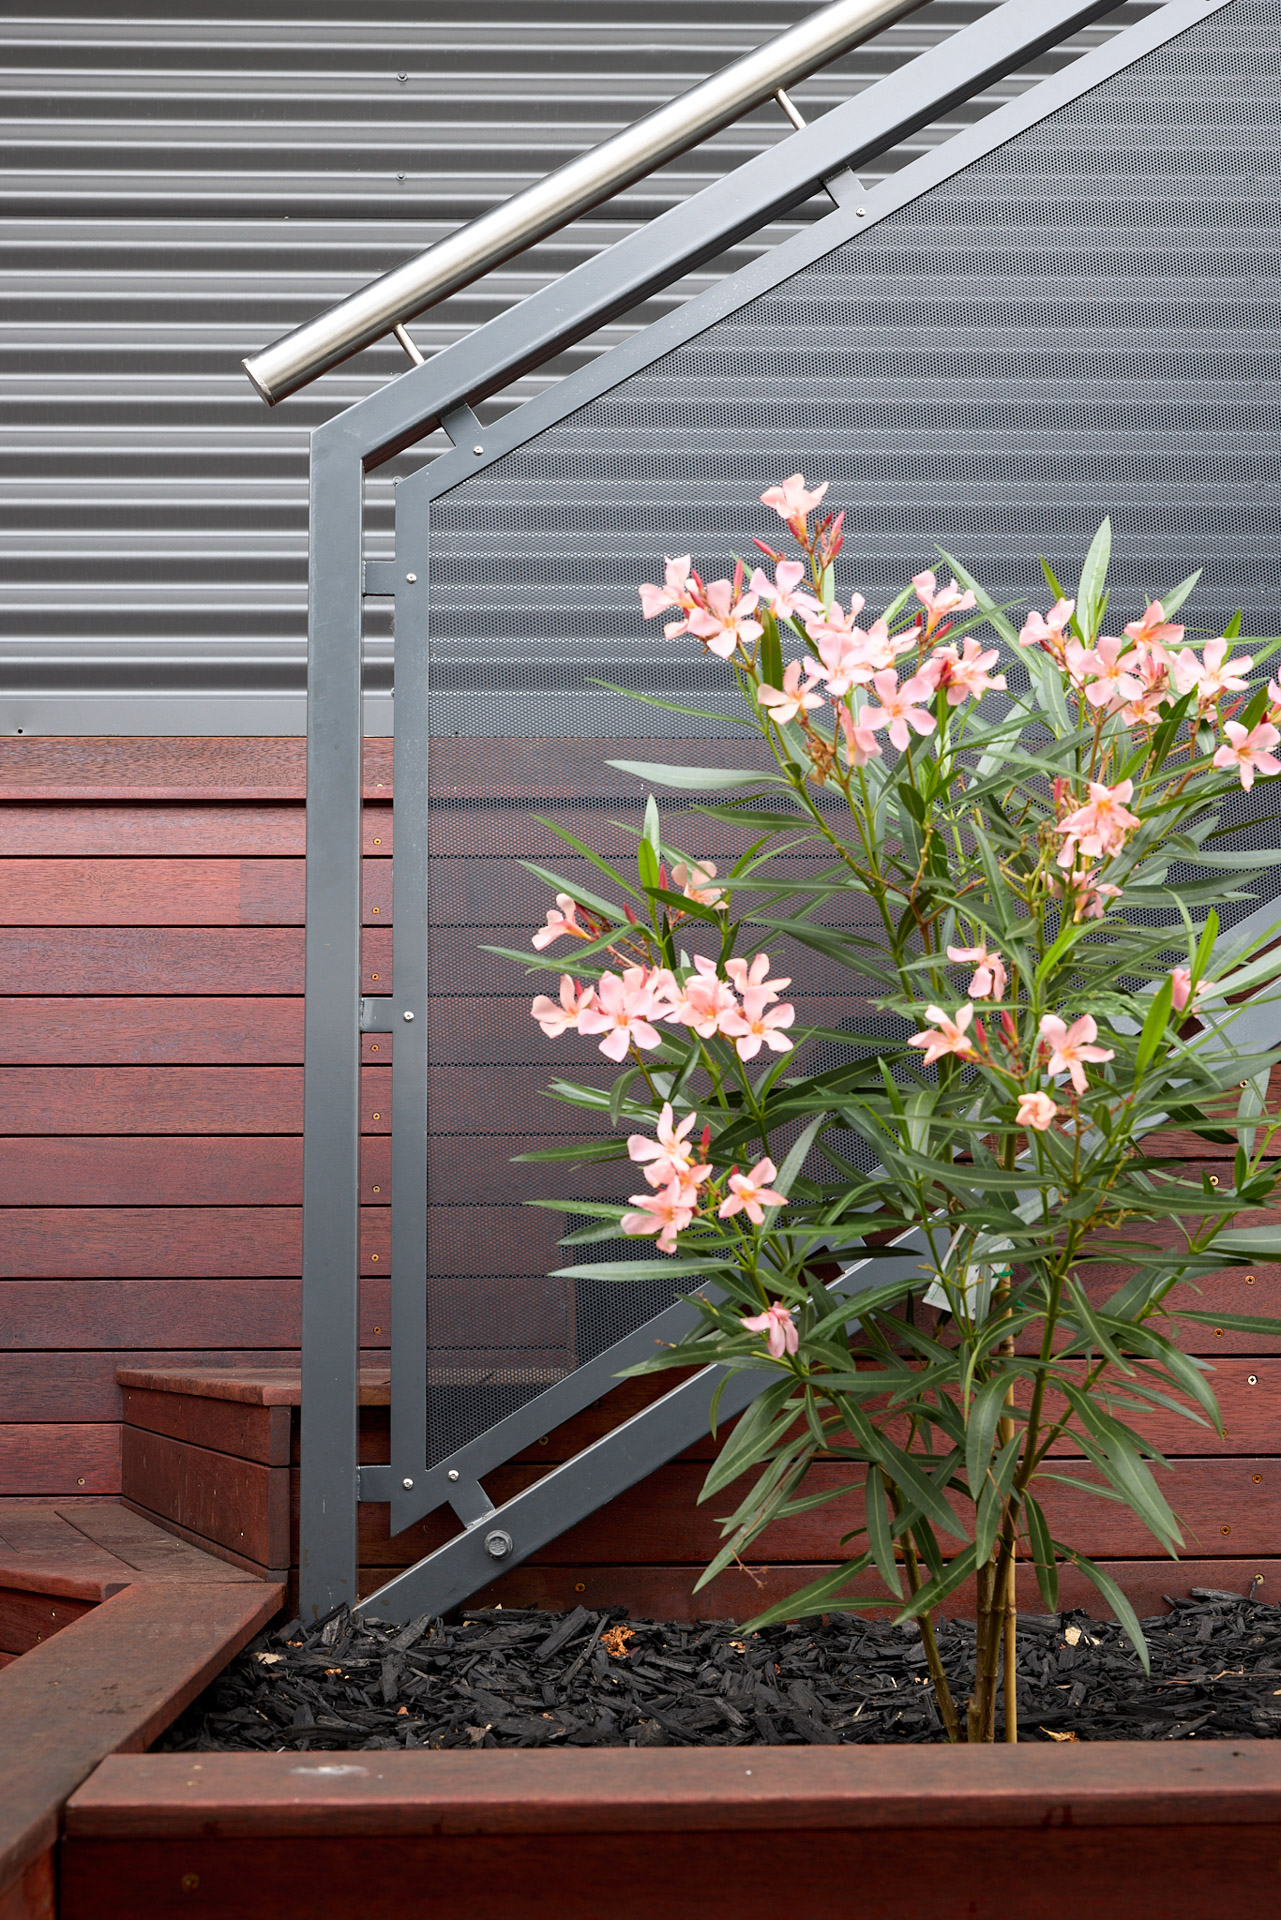 Stainless Steel Handrails Melbourne